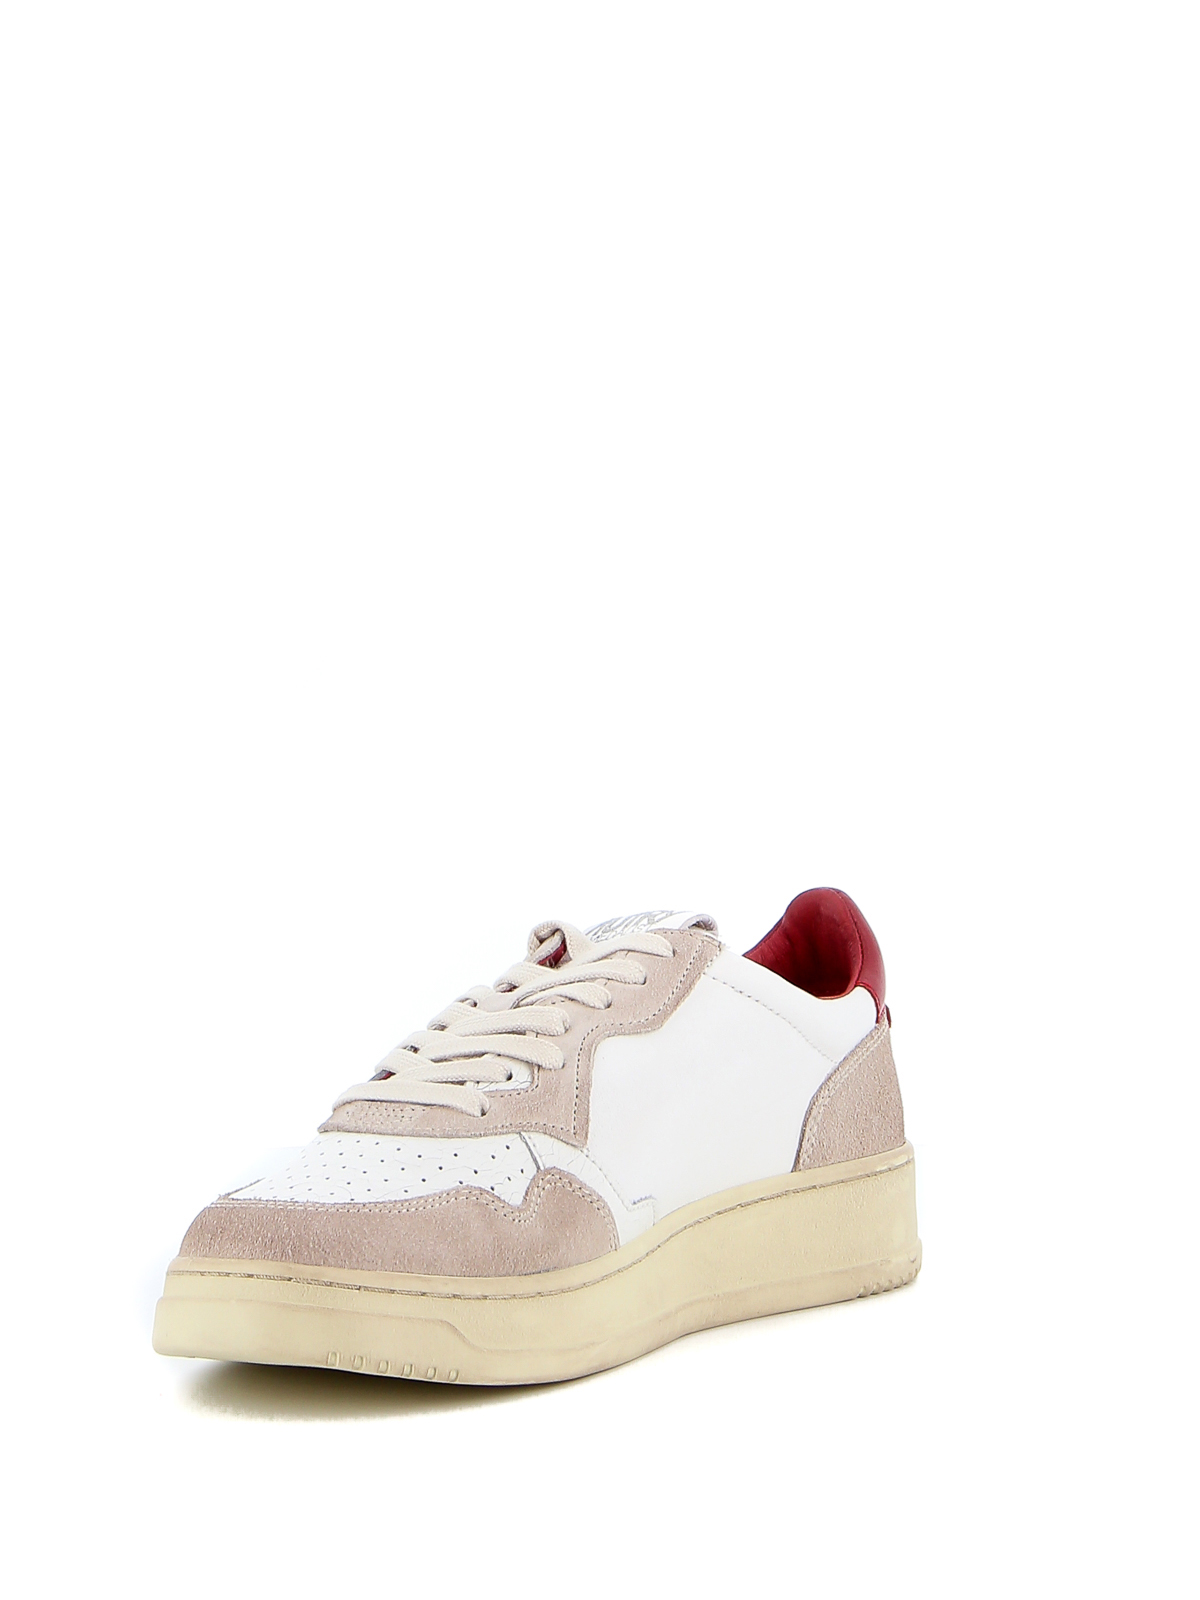 Trainers Autry - Medalist suede and leather sneakers - AULMWC09